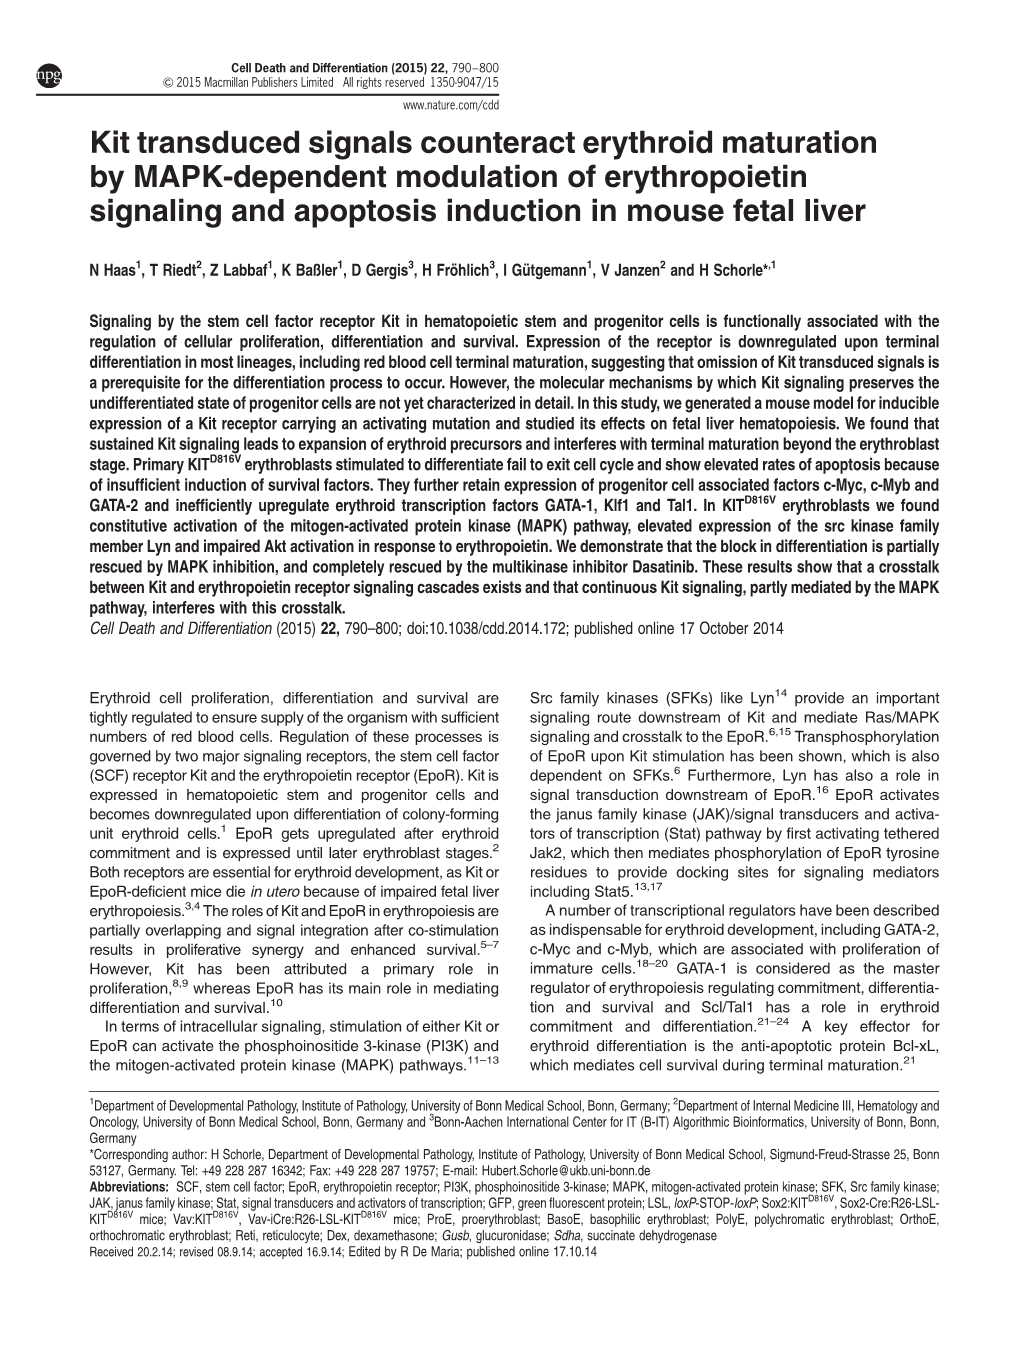 Kit Transduced Signals Counteract Erythroid Maturation by MAPK-Dependent Modulation of Erythropoietin Signaling and Apoptosis Induction in Mouse Fetal Liver